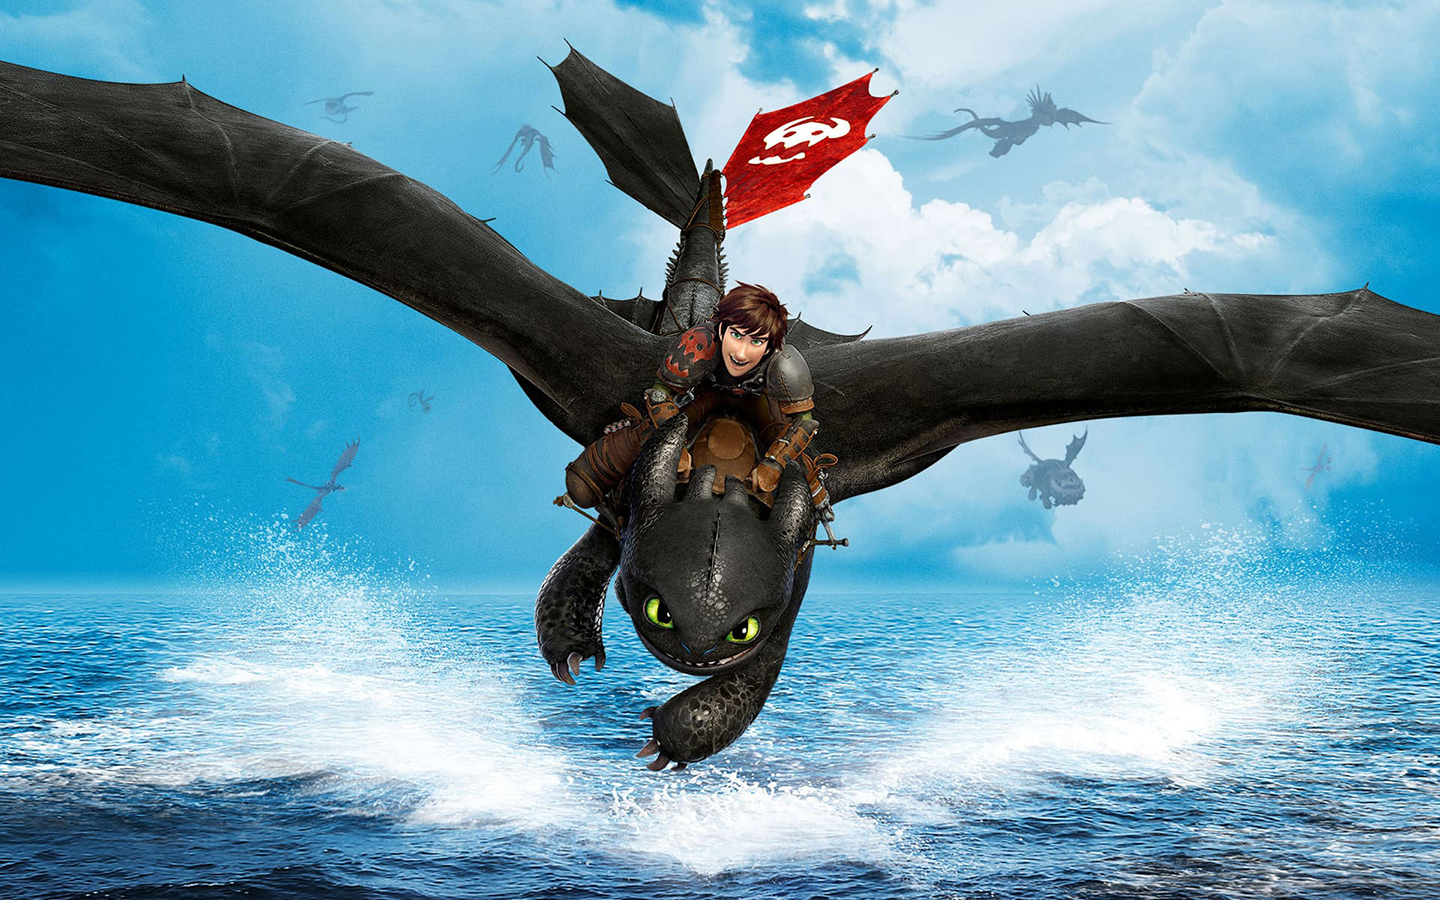 How to Train Your Dragon 3 Officially Named ‘How to Train Your Dragon: The Hidden World’